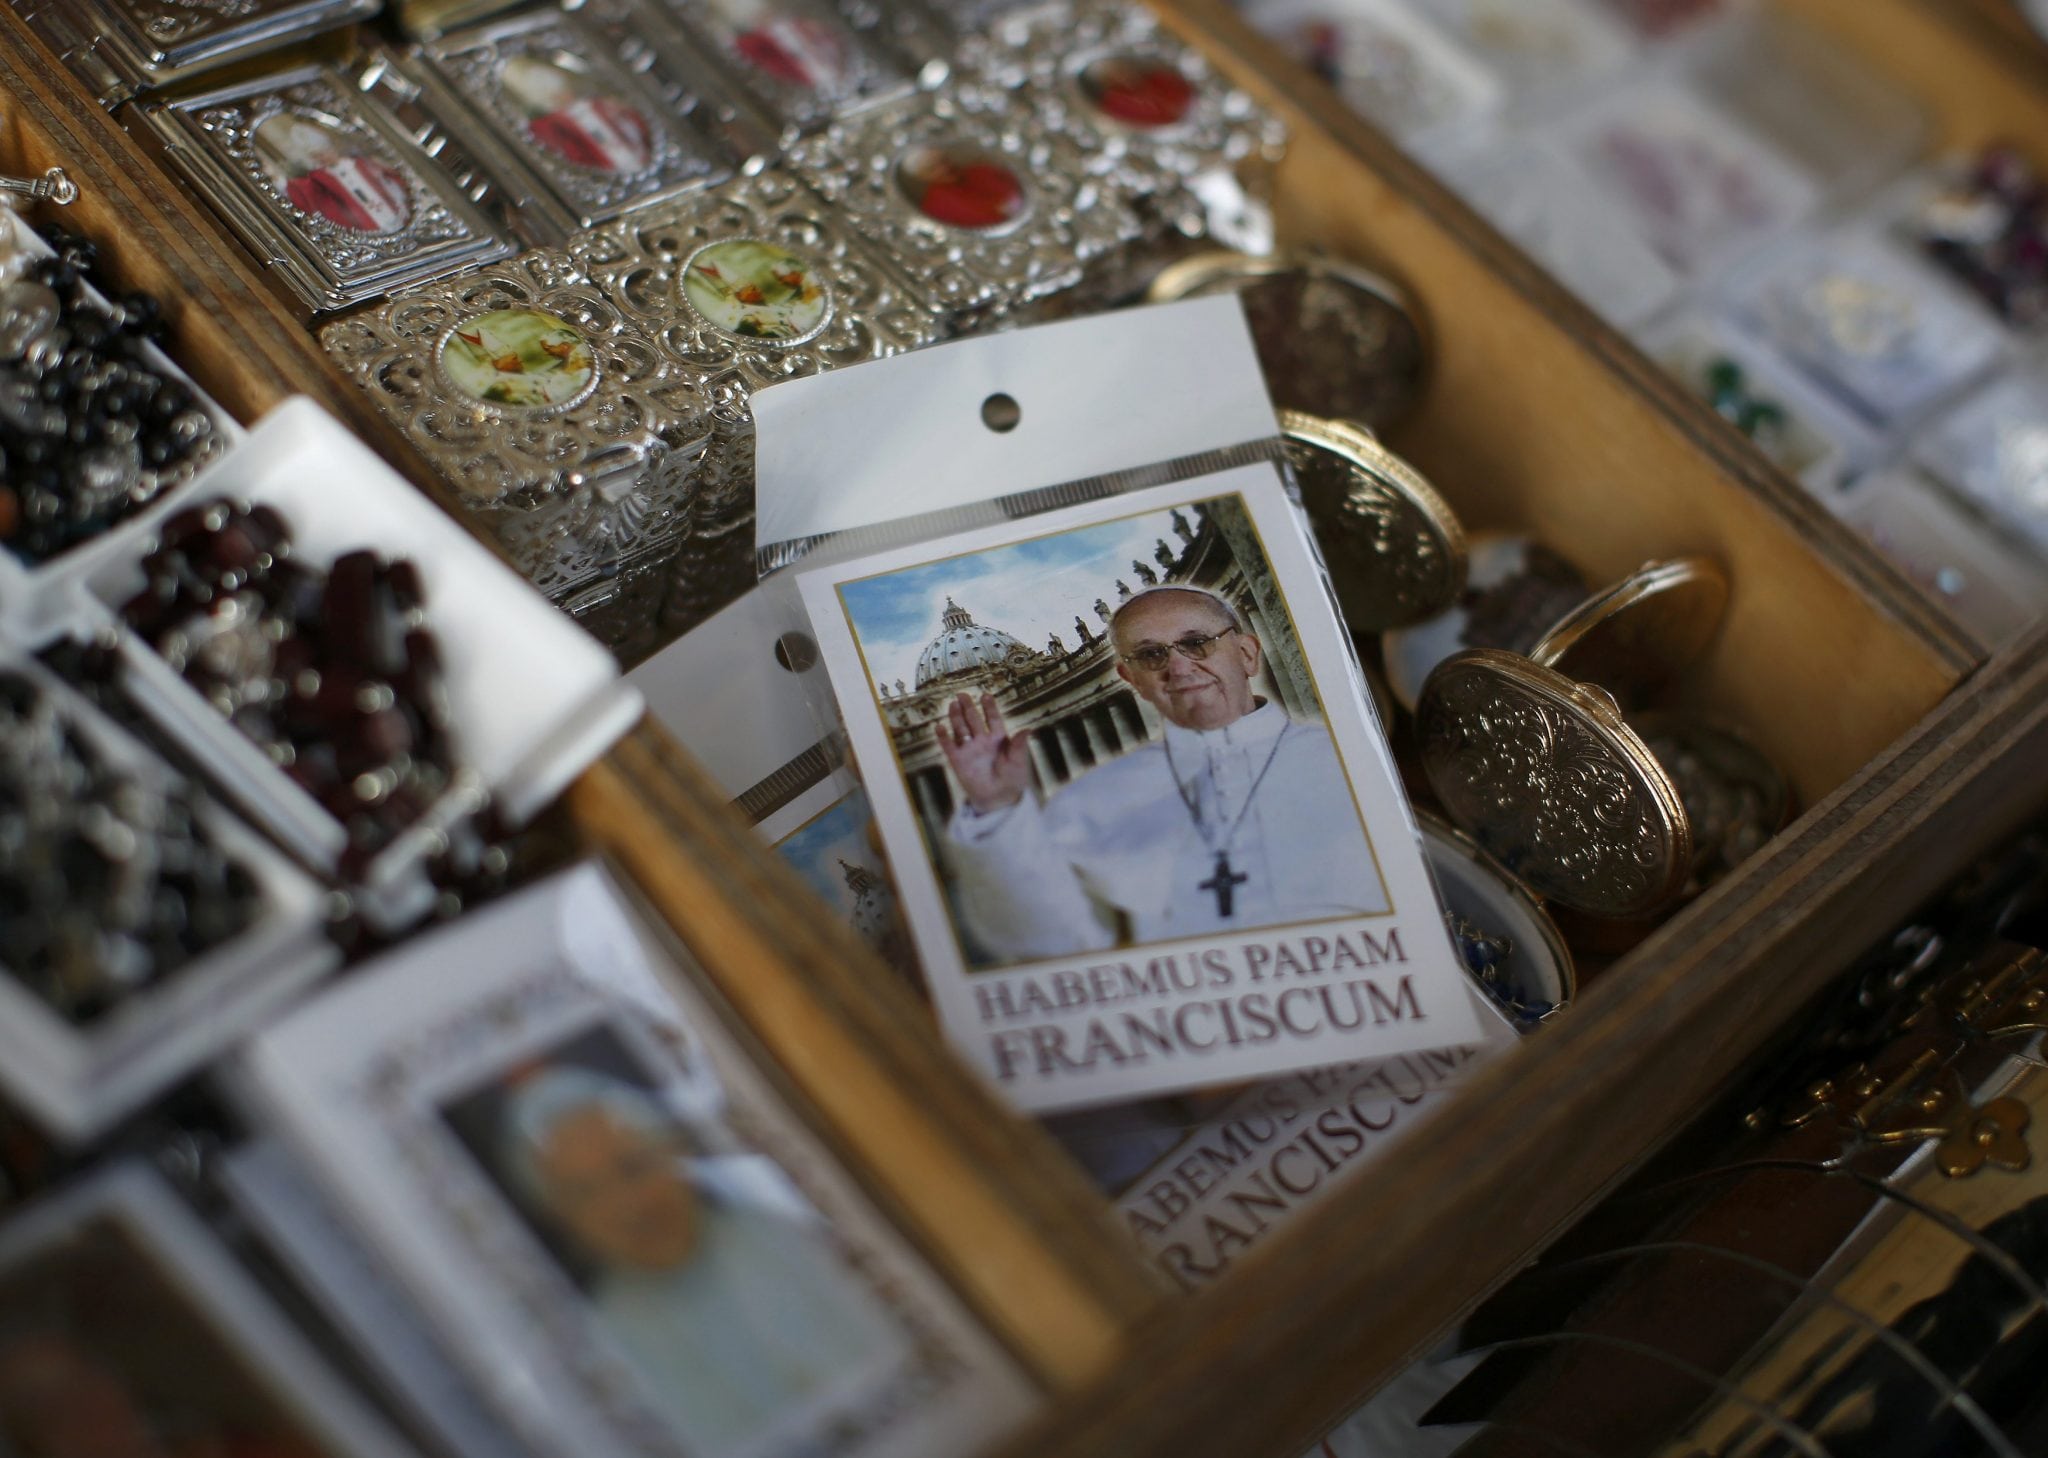 A rosary package with the newly-printed image of the newly-elected Pope Francis, Cardinal Jorge Mario Bergoglio of Argentina is displayed in a tourist shop outside the Vatican in Rome, March 14. 